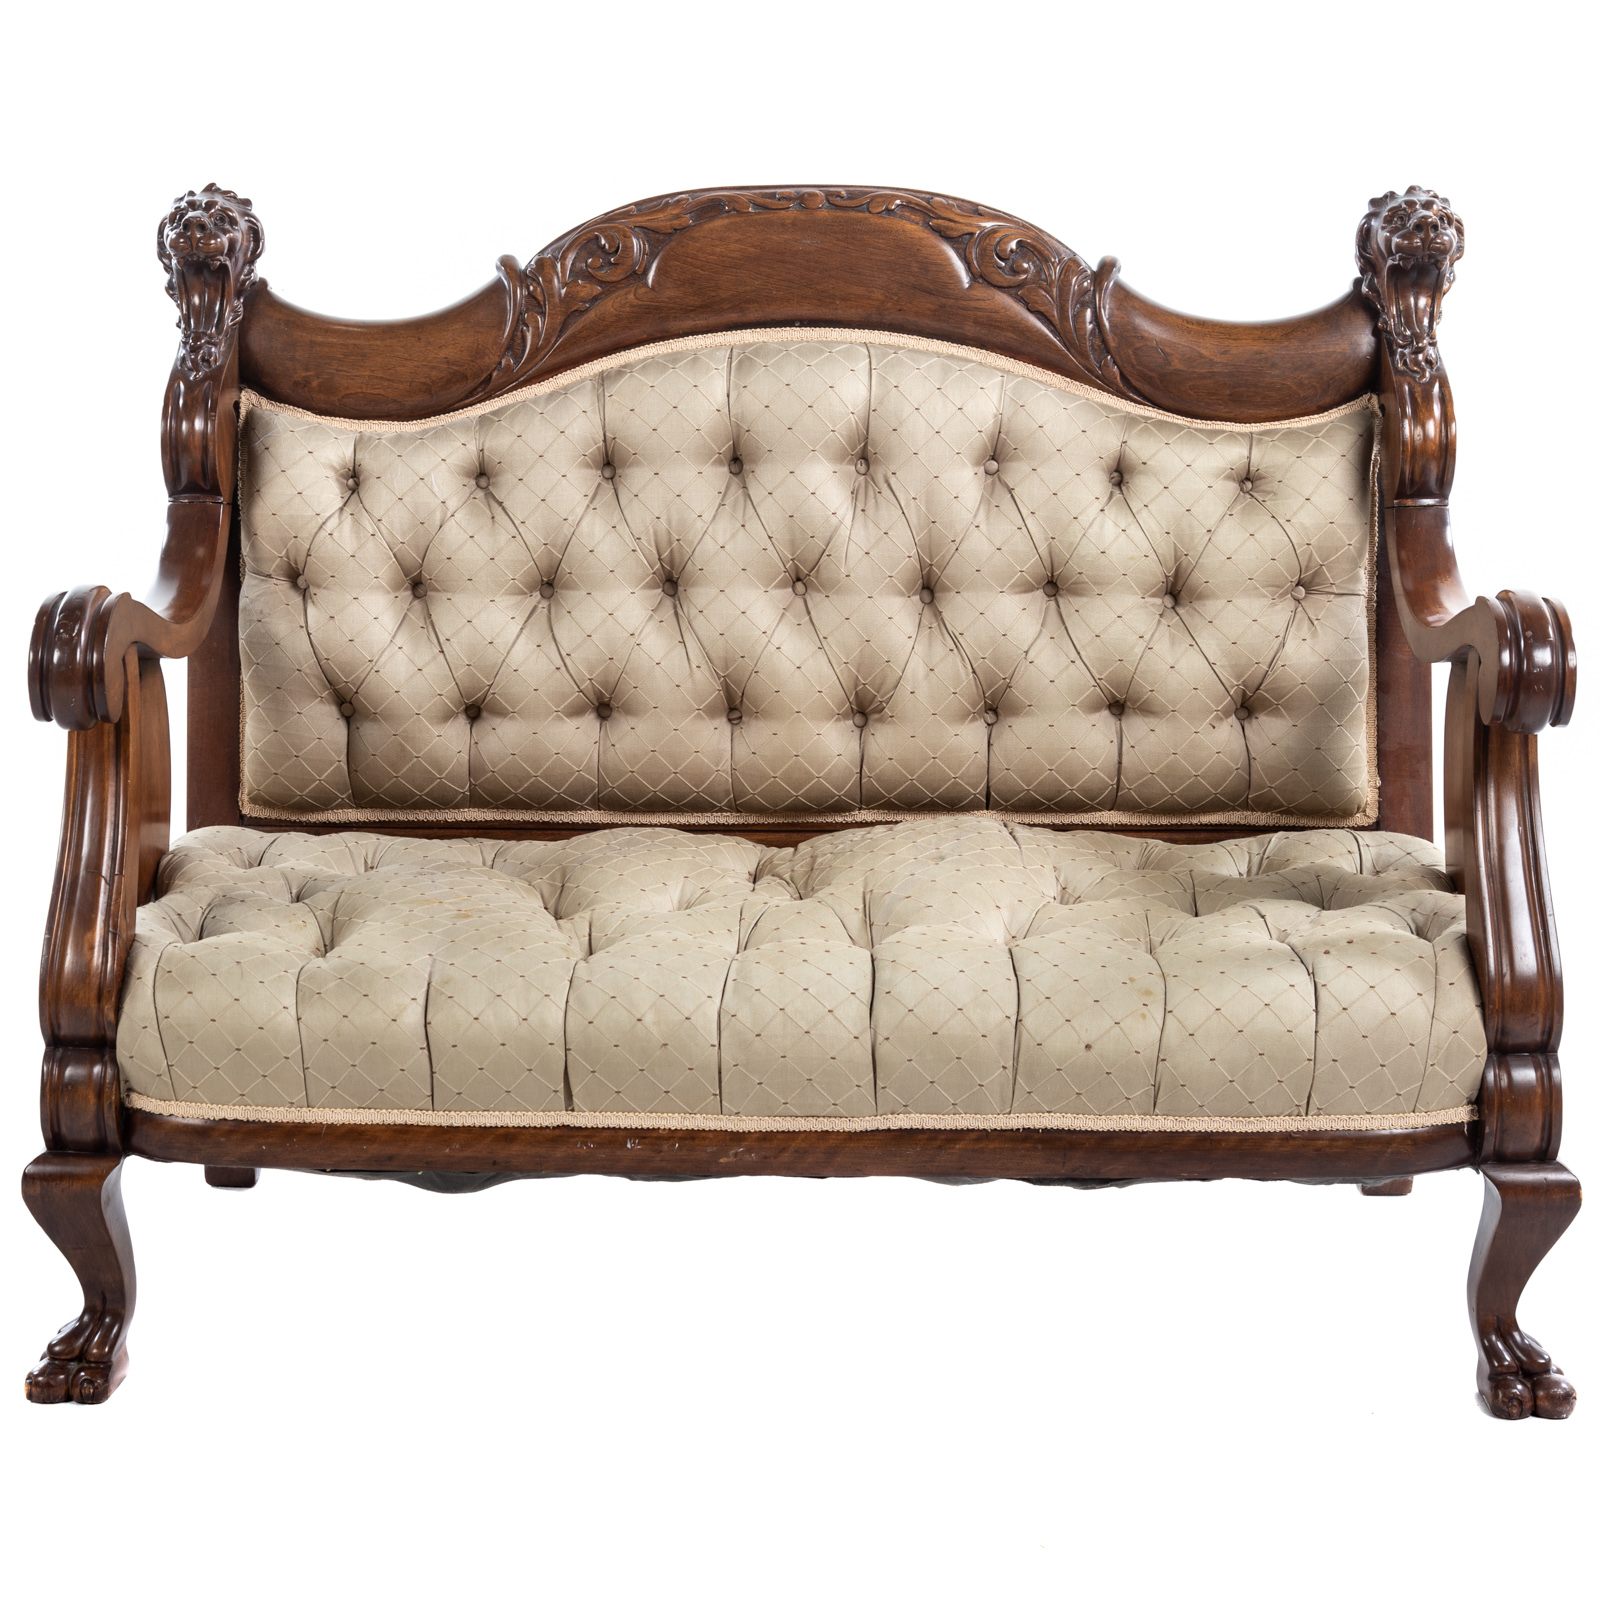 CONTINENTAL TUFTED CARVED SETTEE